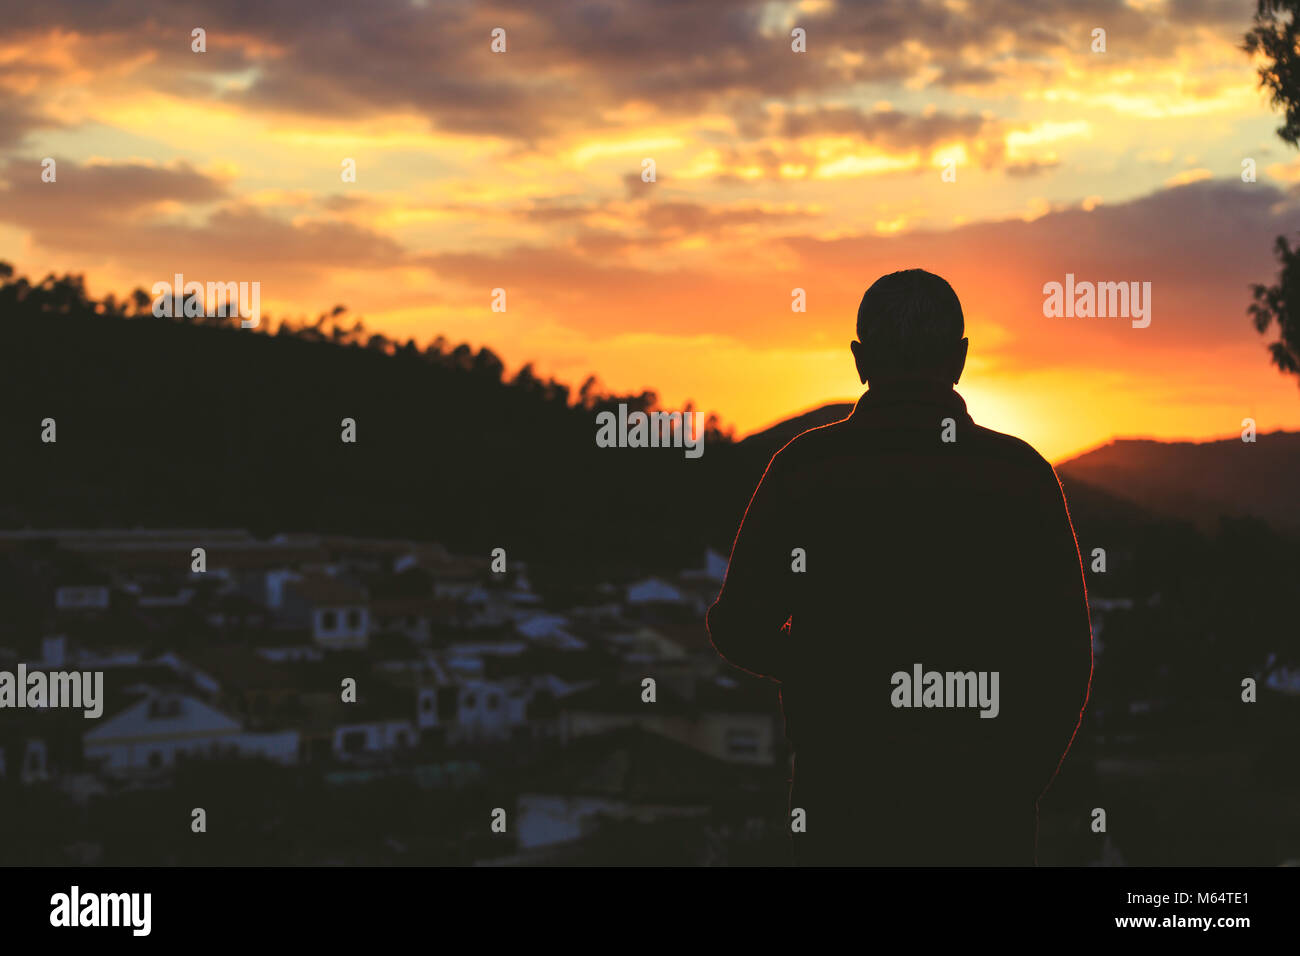 Silhouette of old man with his back to the sunset Stock Photo